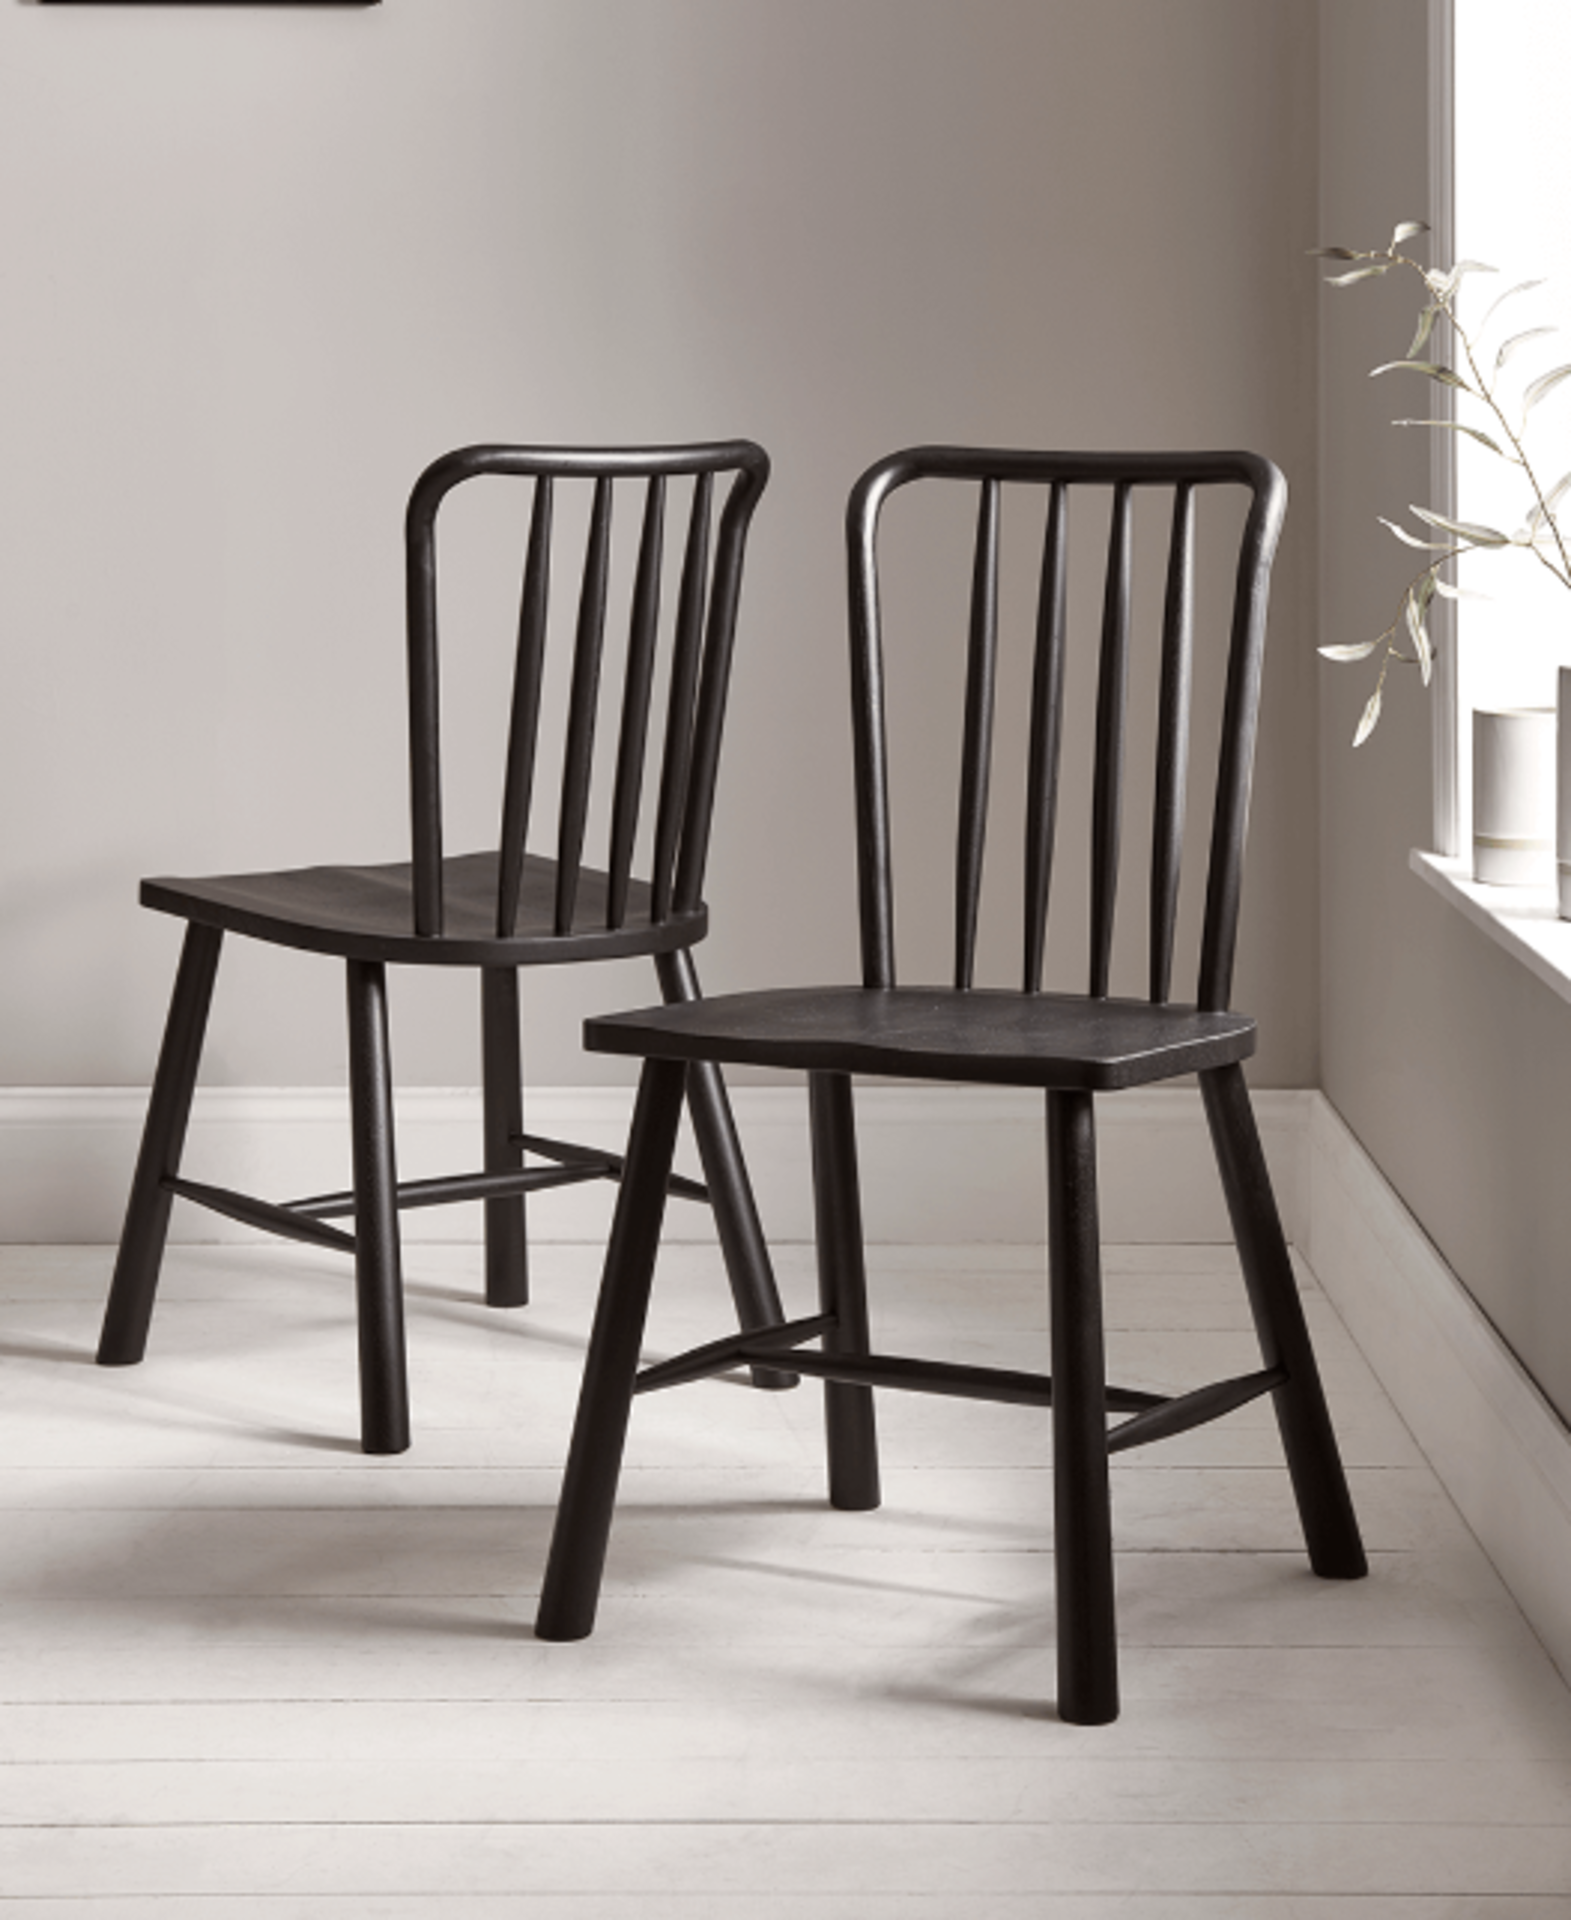 Cox & Cox Two Bergen Oak Dining Chairs - Black. RRP £800.00. With their elegantly curved, slatted